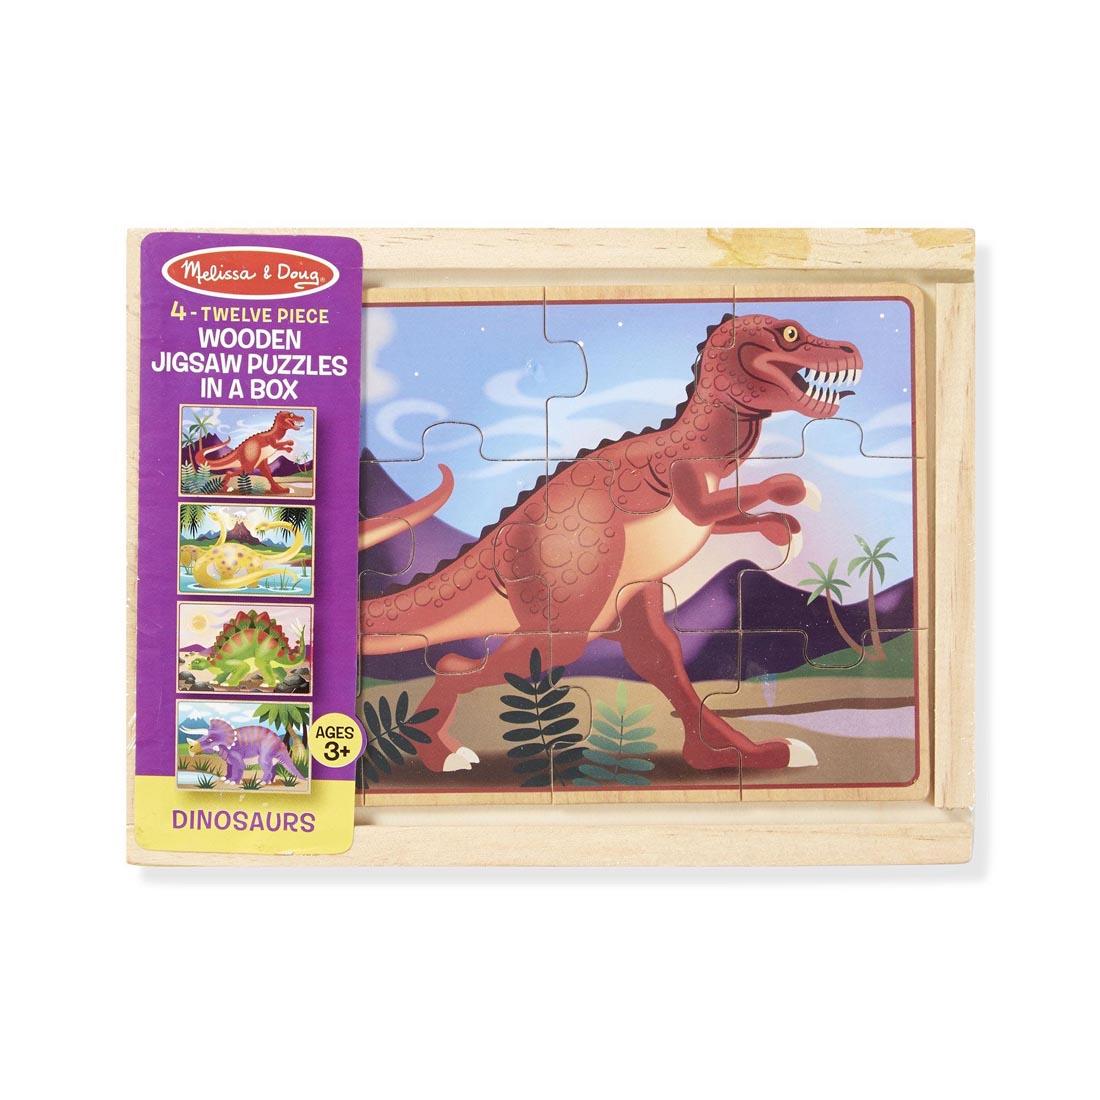 Dinosaurs Wooden Jigsaw Puzzles in a Box By Melissa & Doug